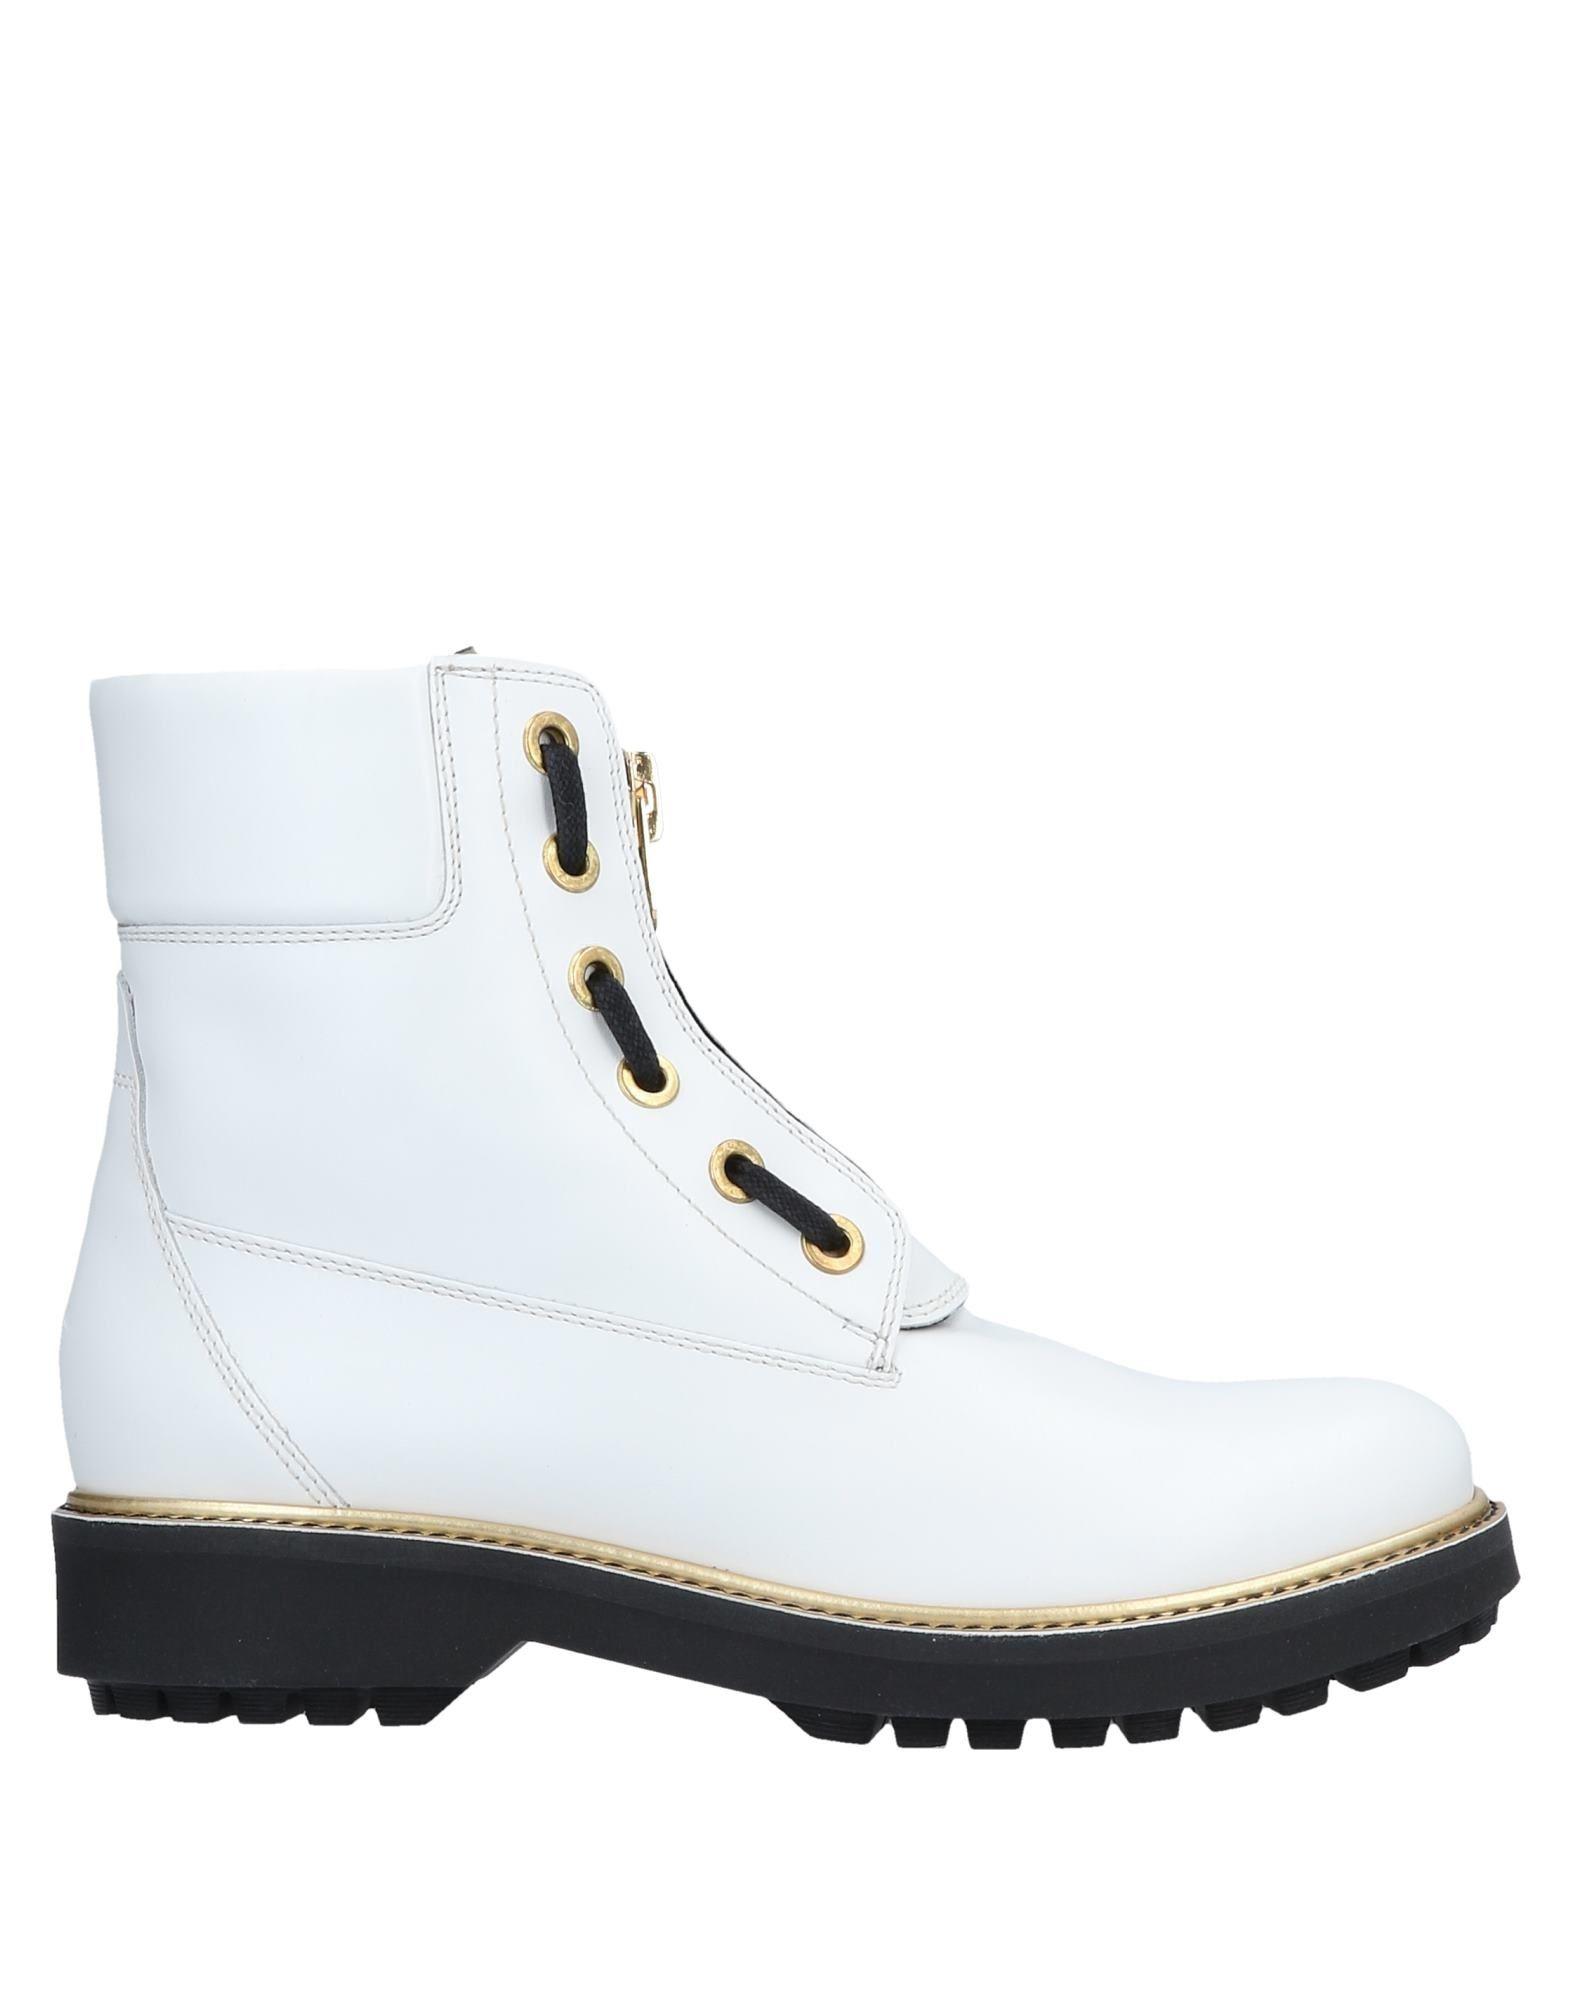 Geox Leather Asheely Plus Bootie in White - Lyst